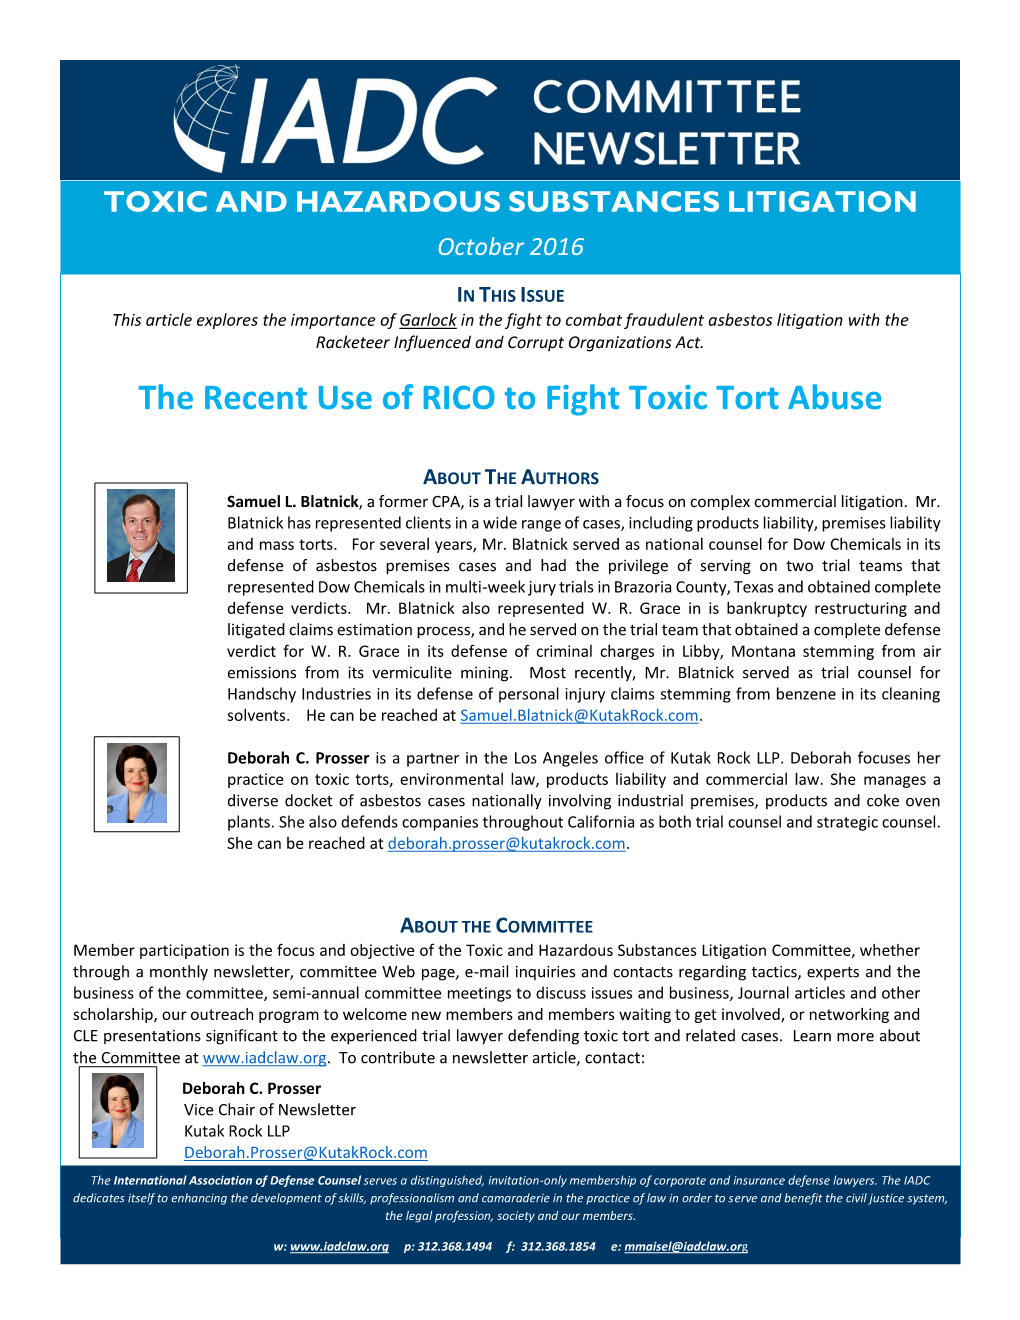 The Recent Use of RICO to Fight Toxic Tort Abuse